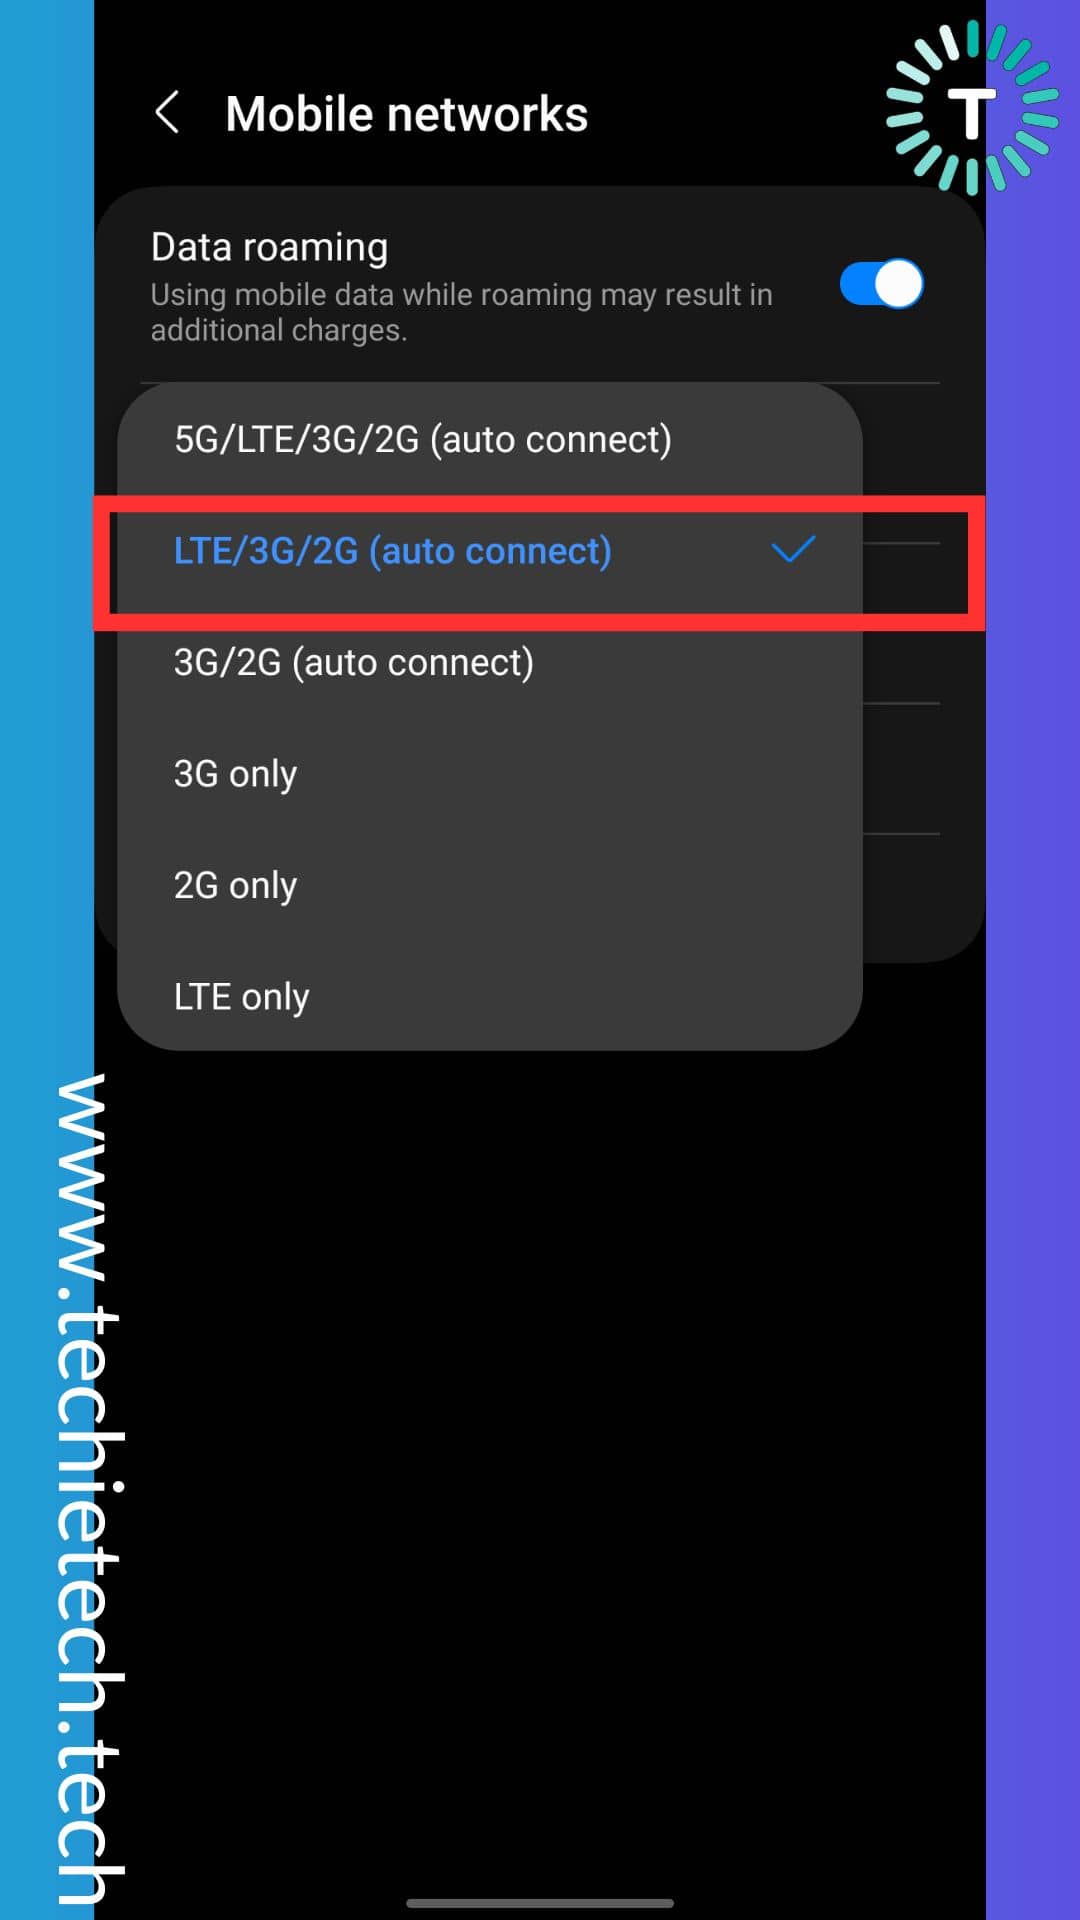 Now tap on LTE 3G 2G (auto connect) to change the Network Mode